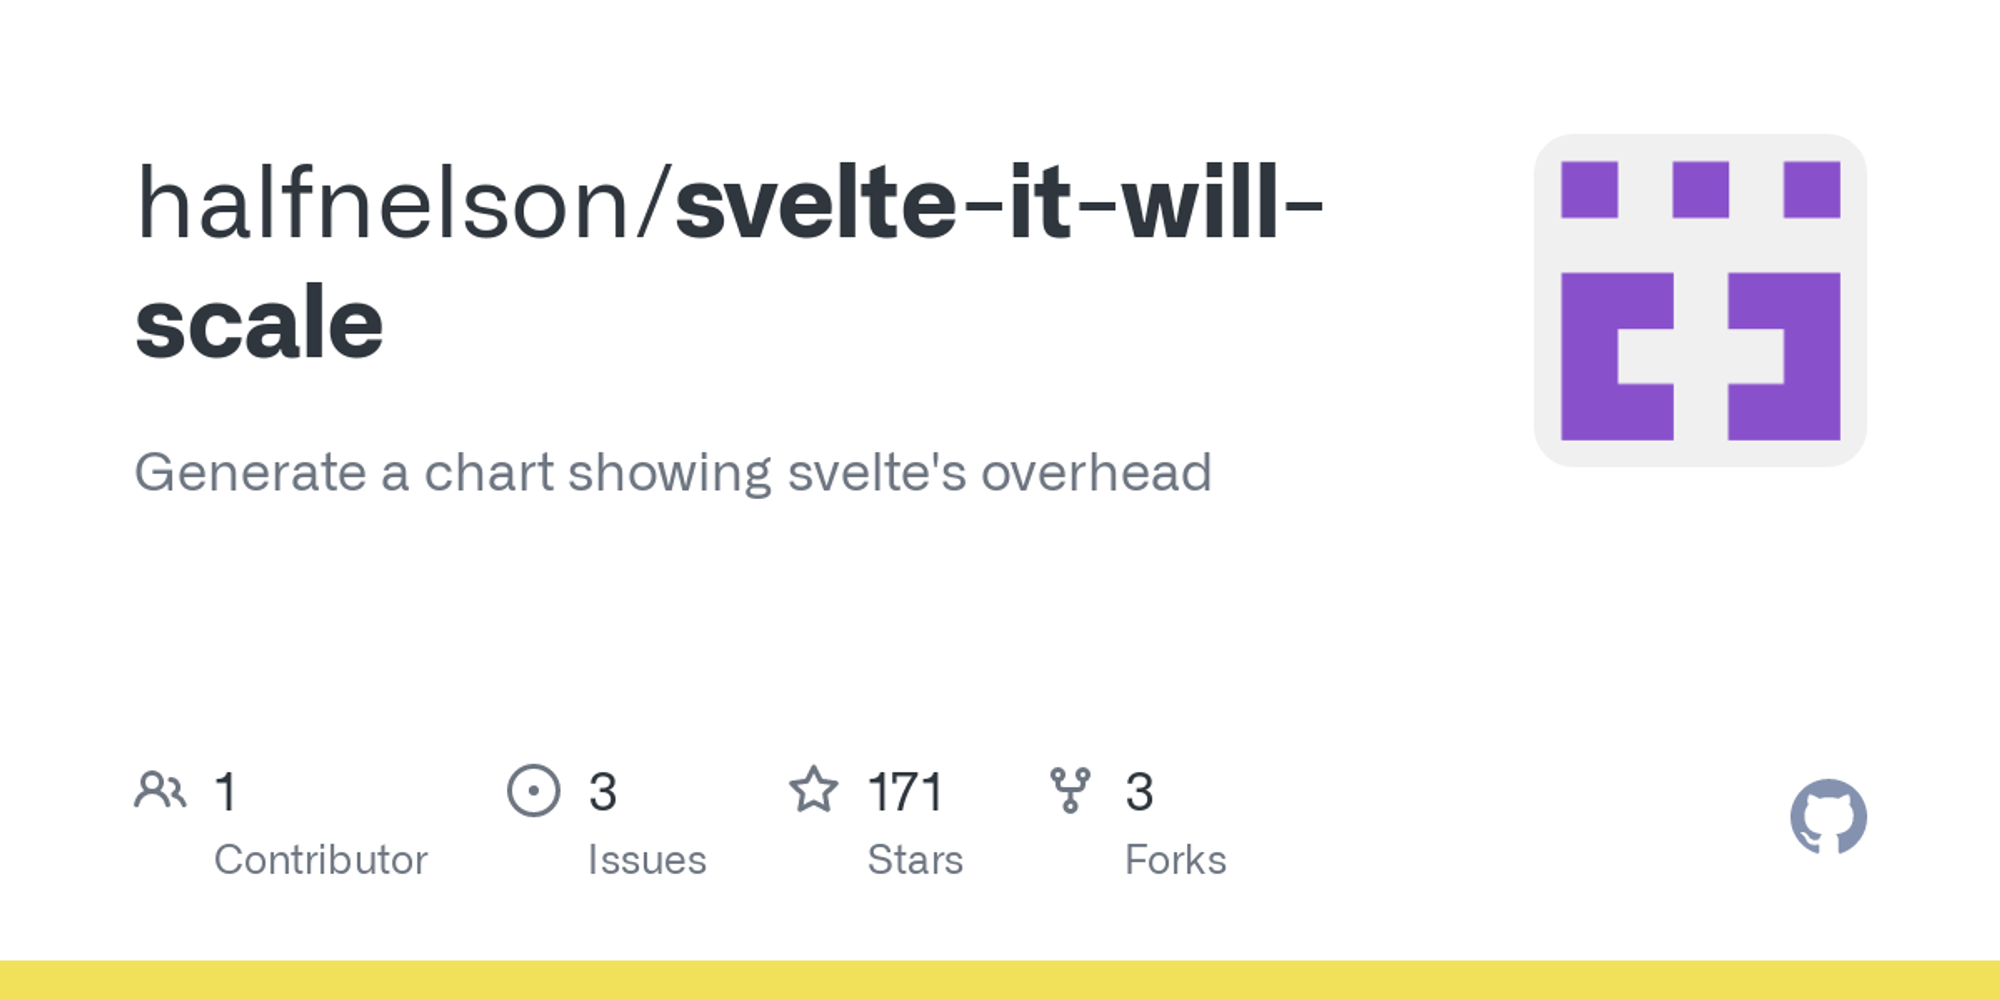 svelte-it-will-scale/README.md at master · halfnelson/svelte-it-will-scale